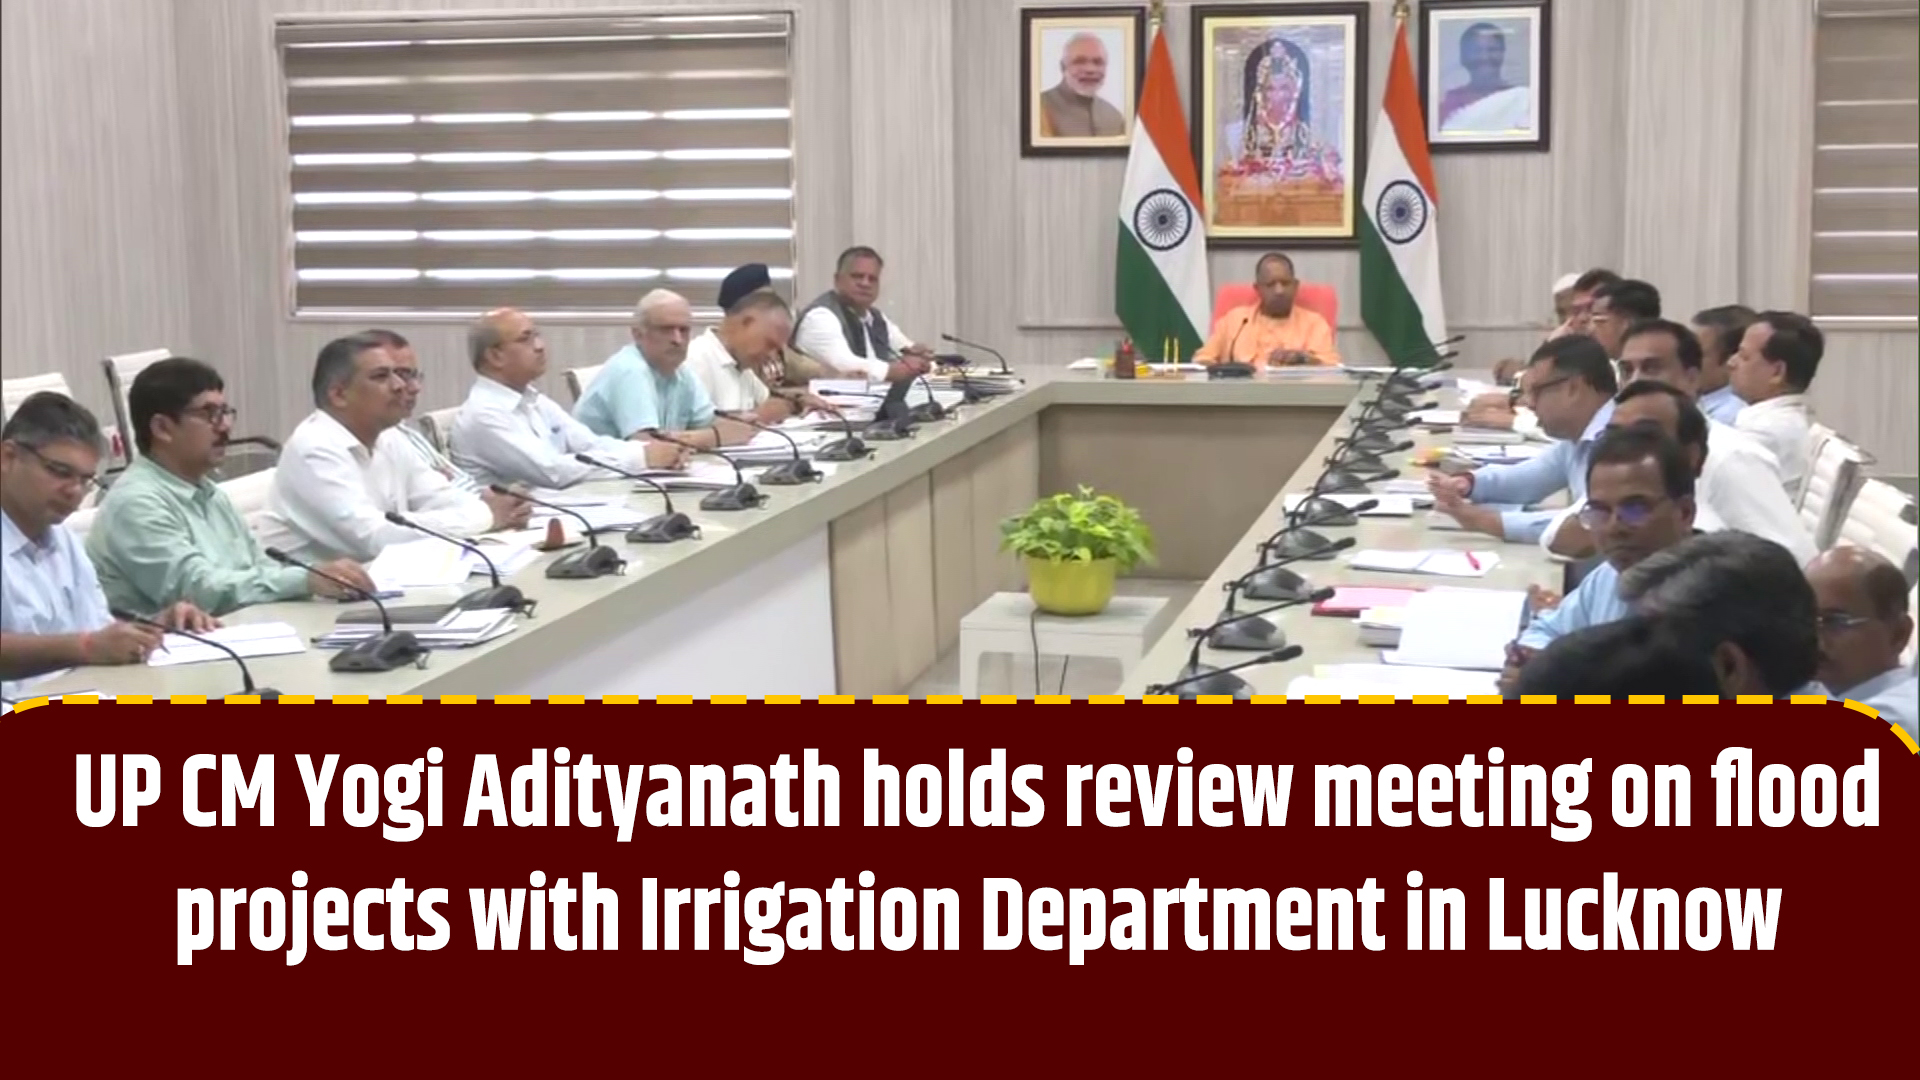 UP CM Yogi Adityanath holds review meeting on flood projects with Irrigation Department in Lucknow